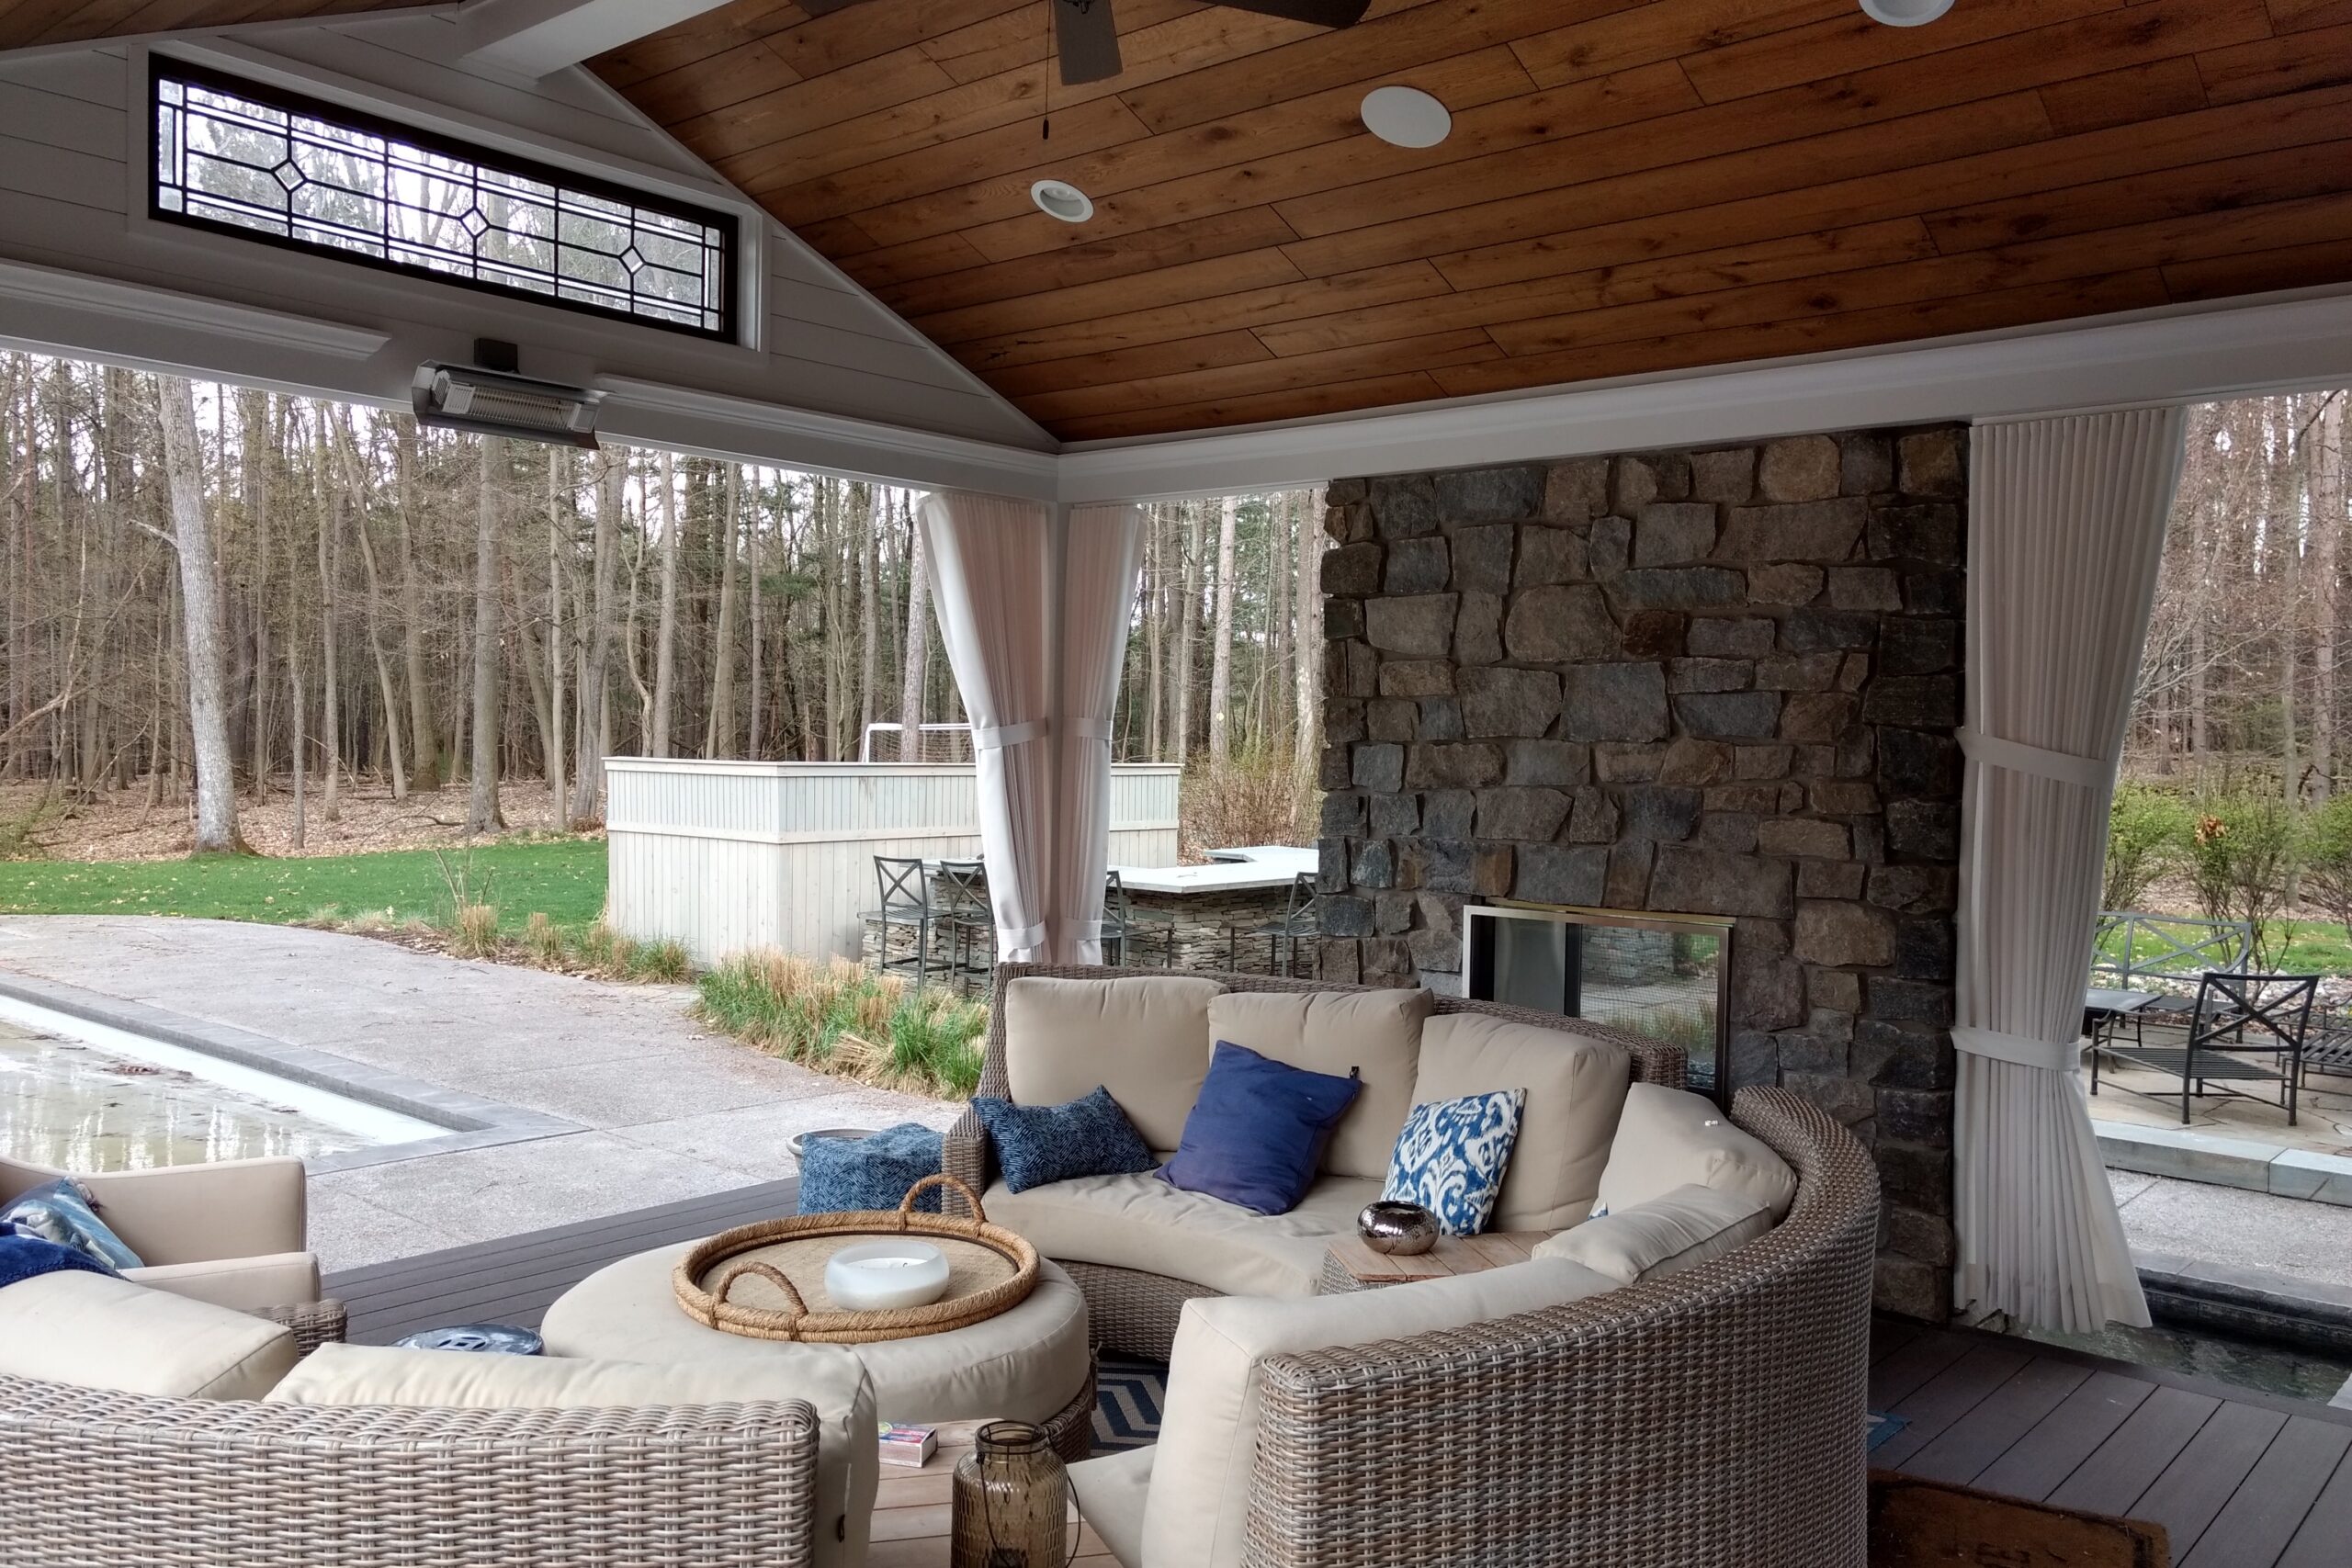 Designing for Outdoor Living